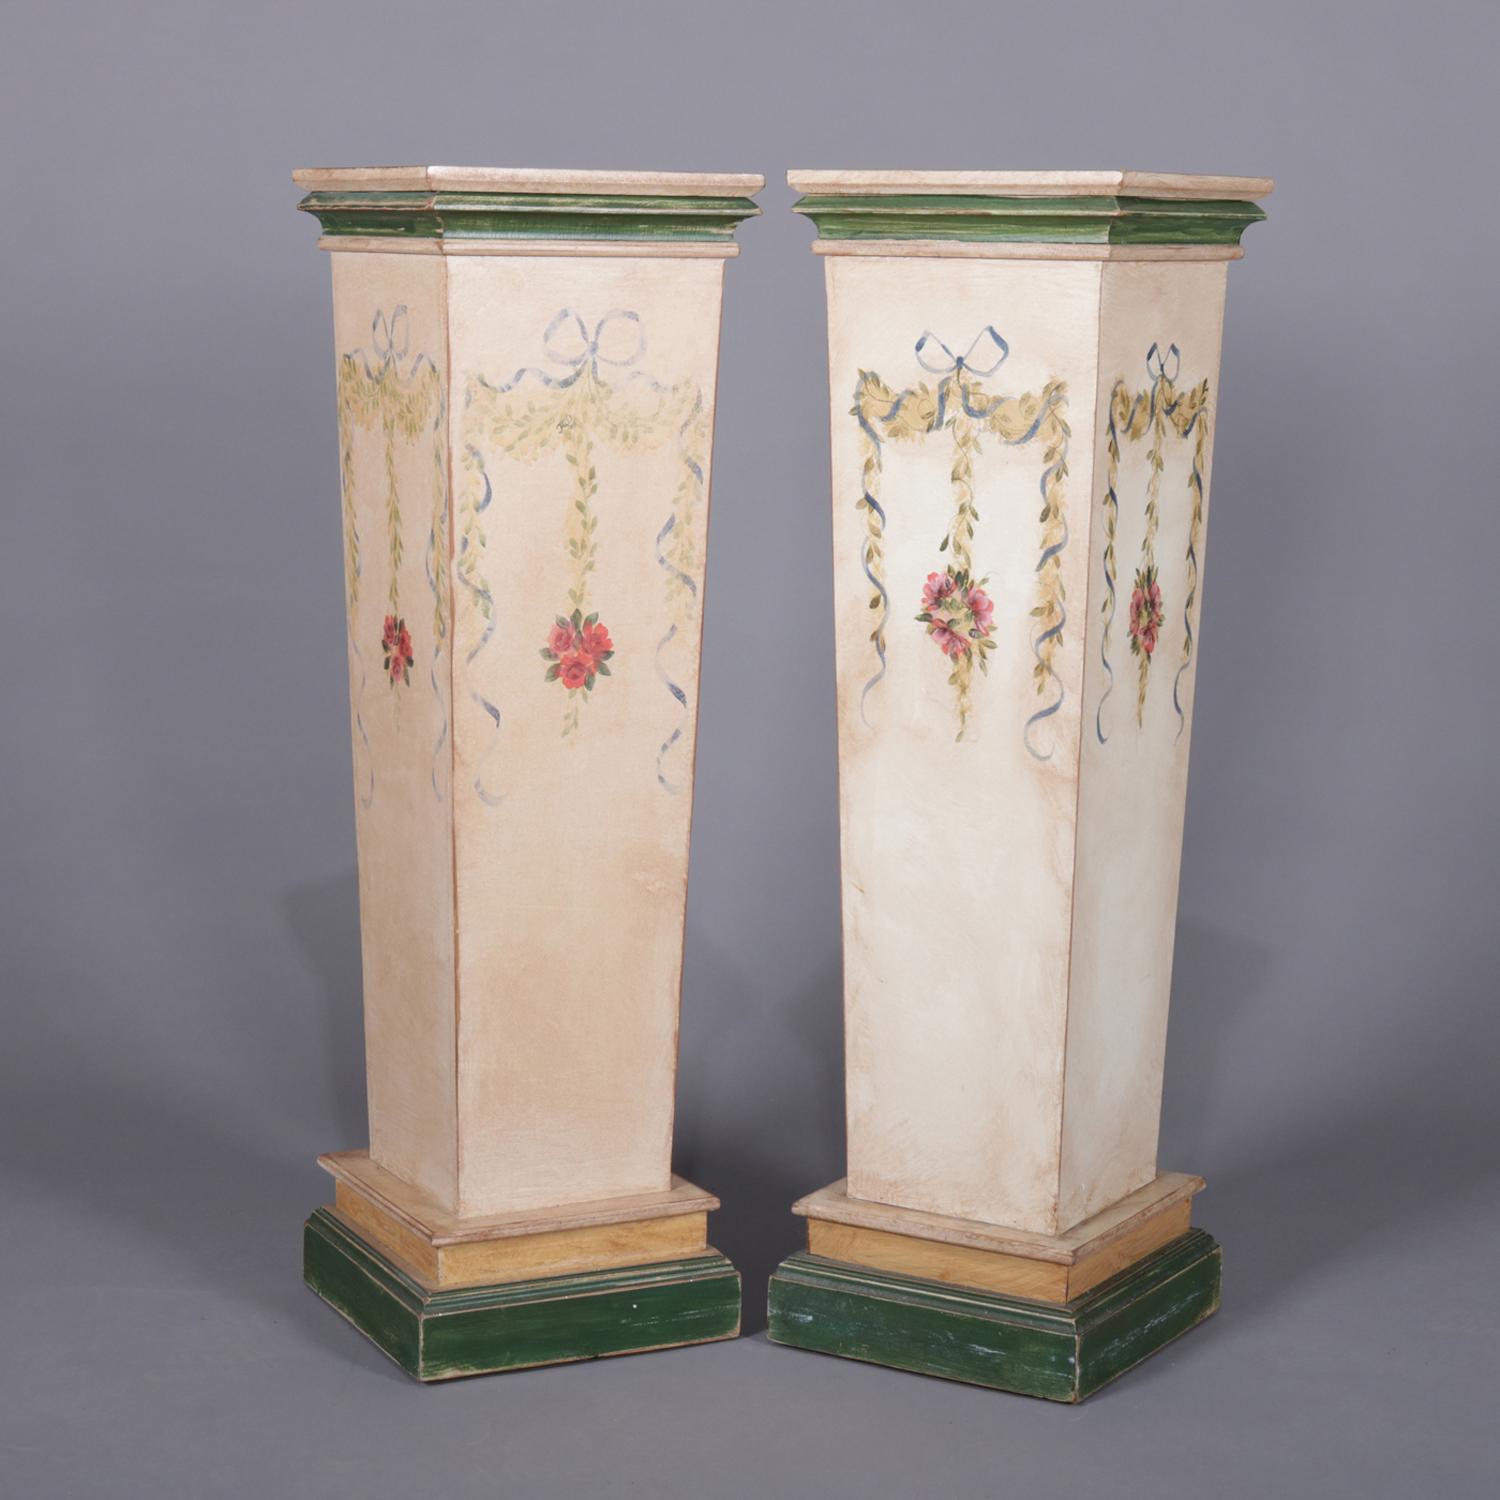 Pair of French Provincial Hand Painted Sculpture Display Pedestals, 20th Century (Französische Provence)